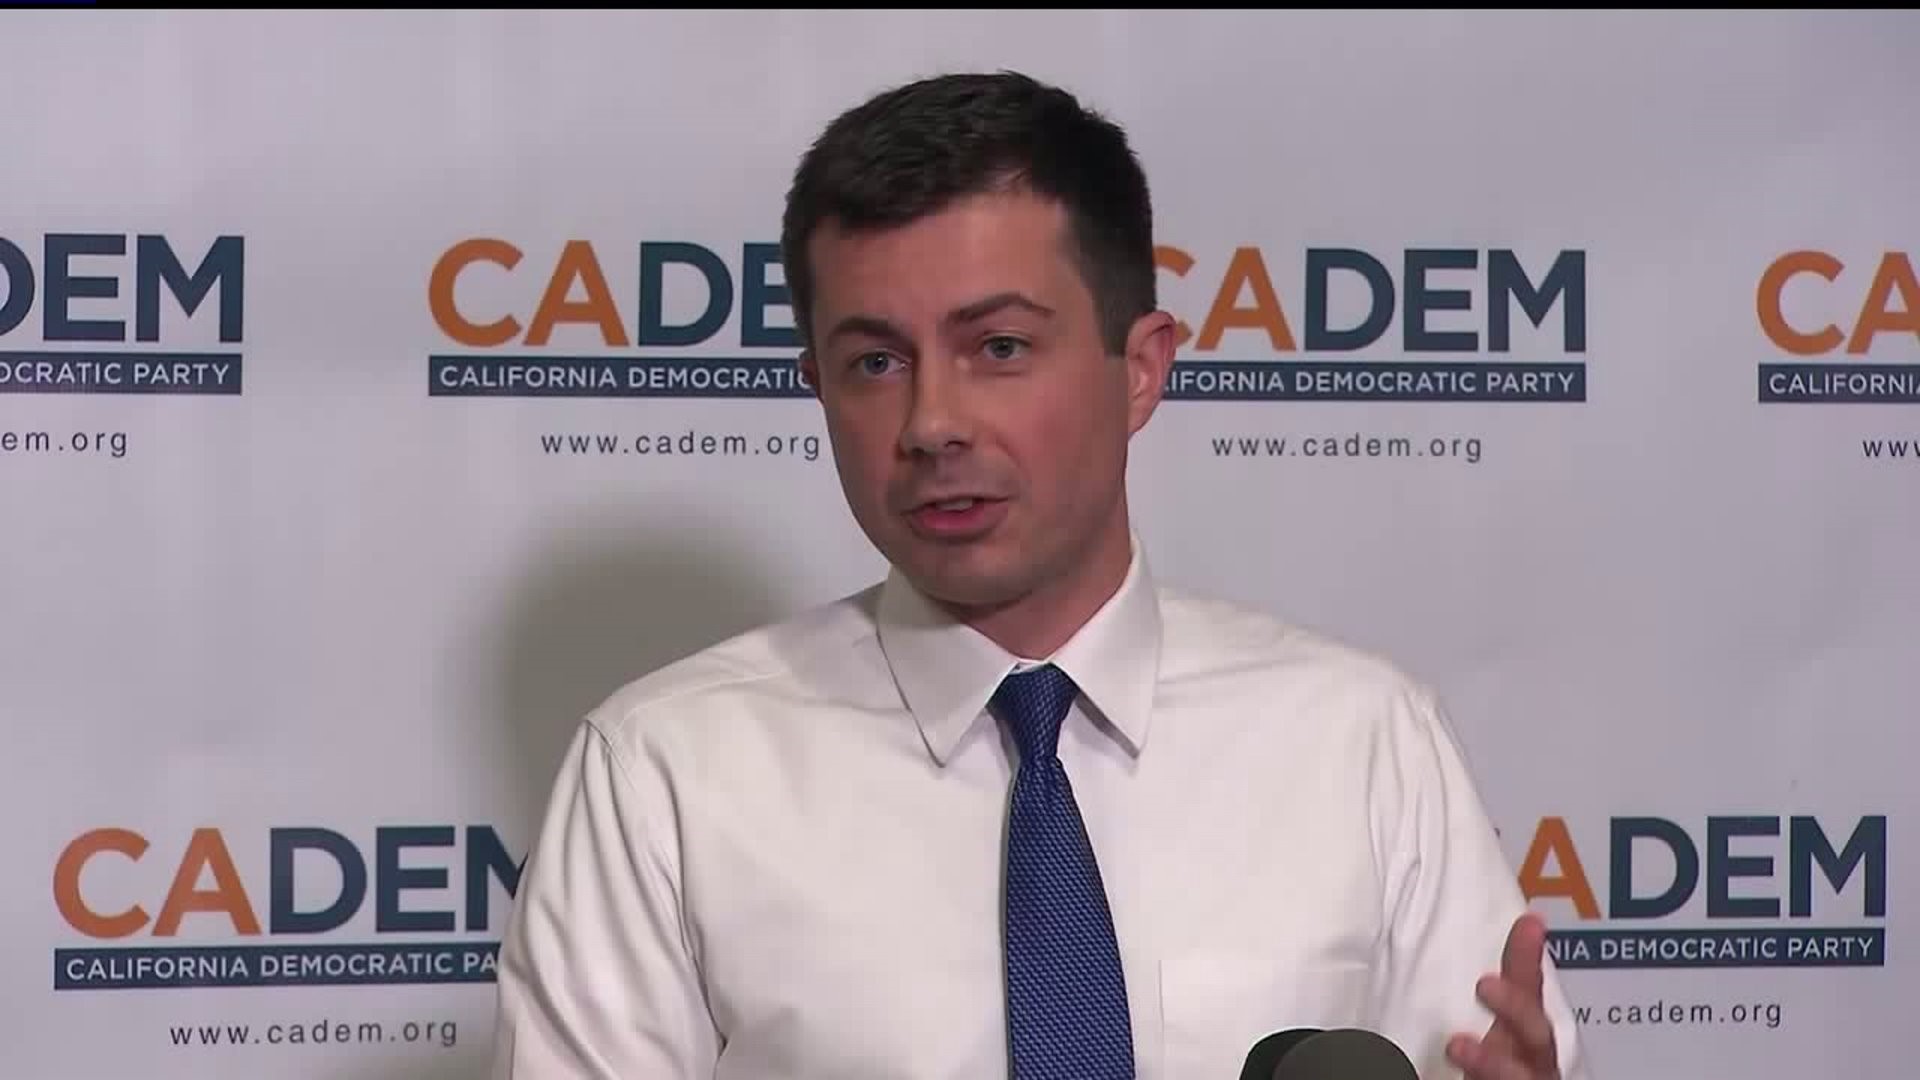 Pete Buttigieg surges to first place in Iowa, new poll shows